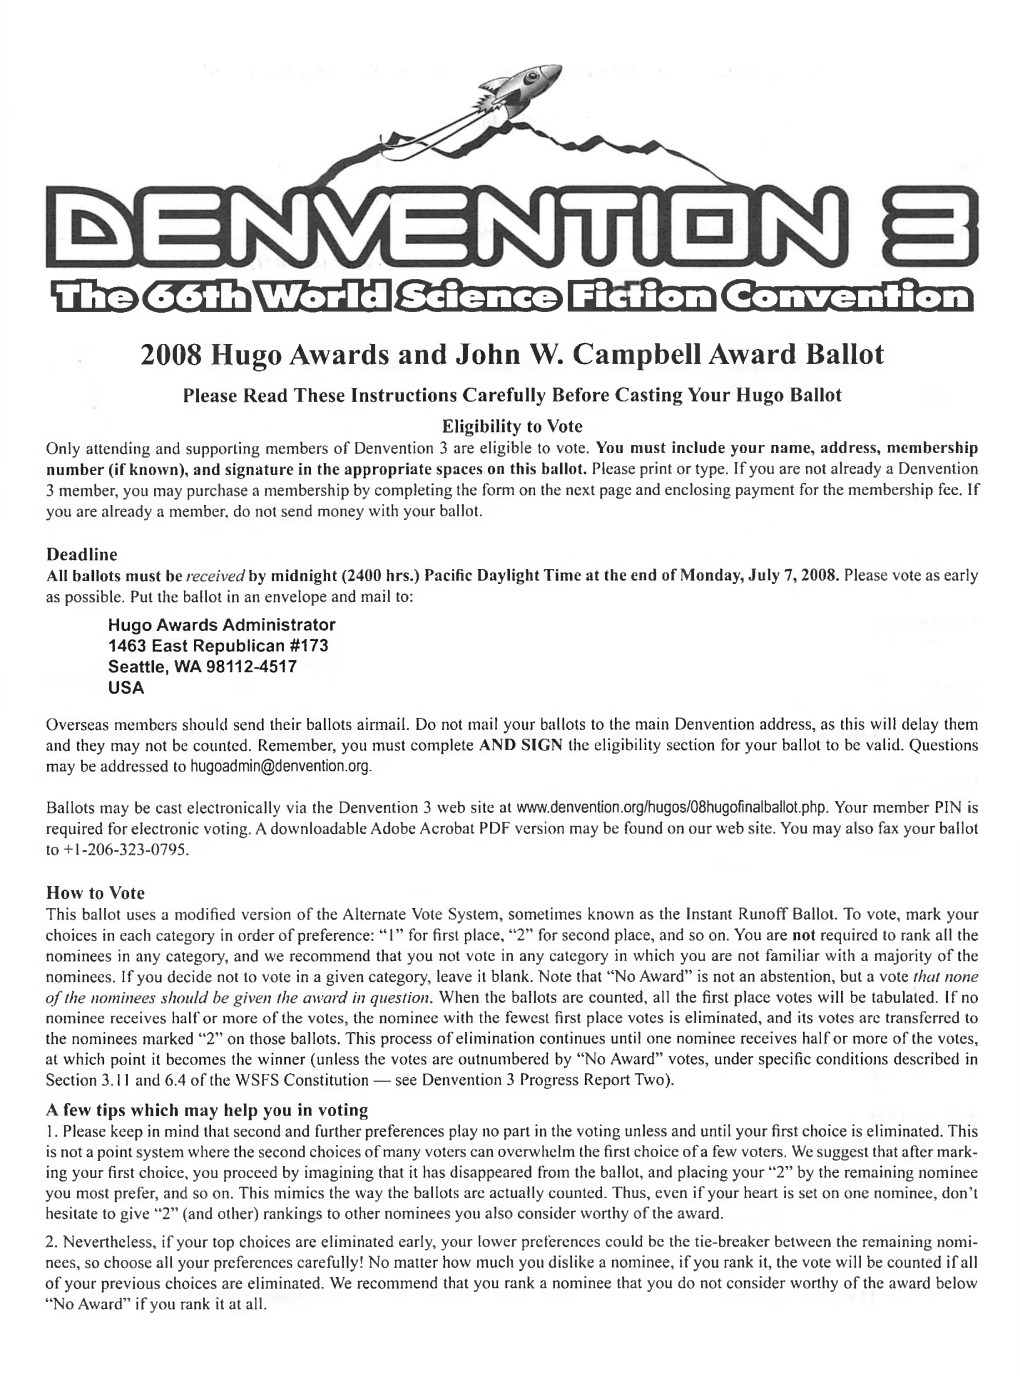 Hugo Ballot Eligibility to Vote Only Attending and Supporting Members of Denvention 3 Are Eligible to Vote